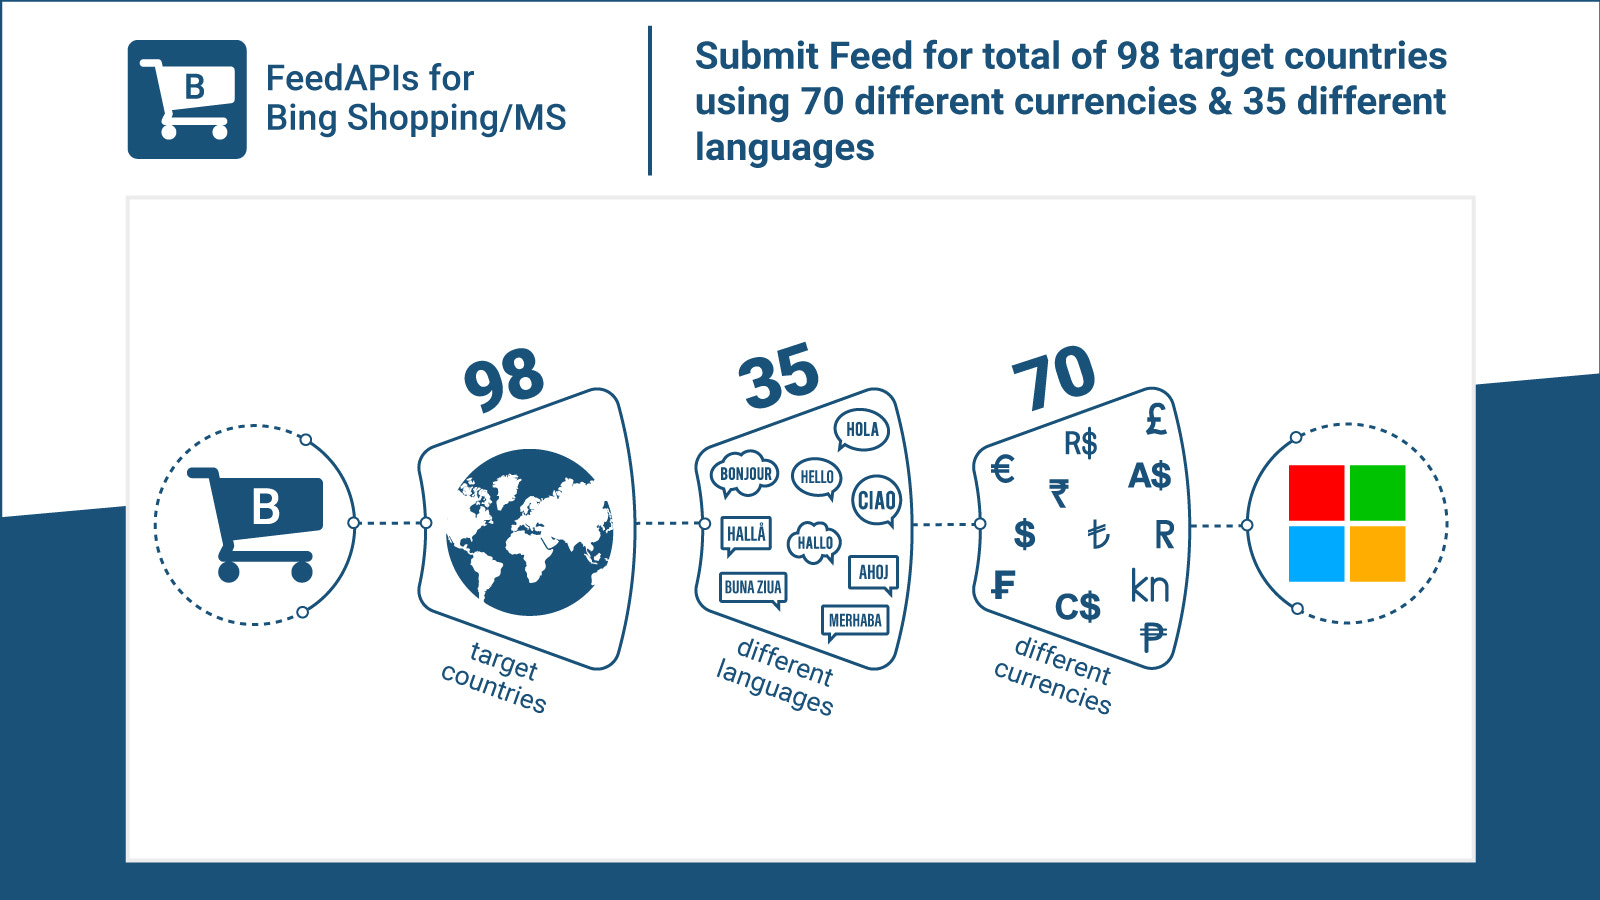 Submit Feed for 98 Countries using 35 Languages & 70 Currencies